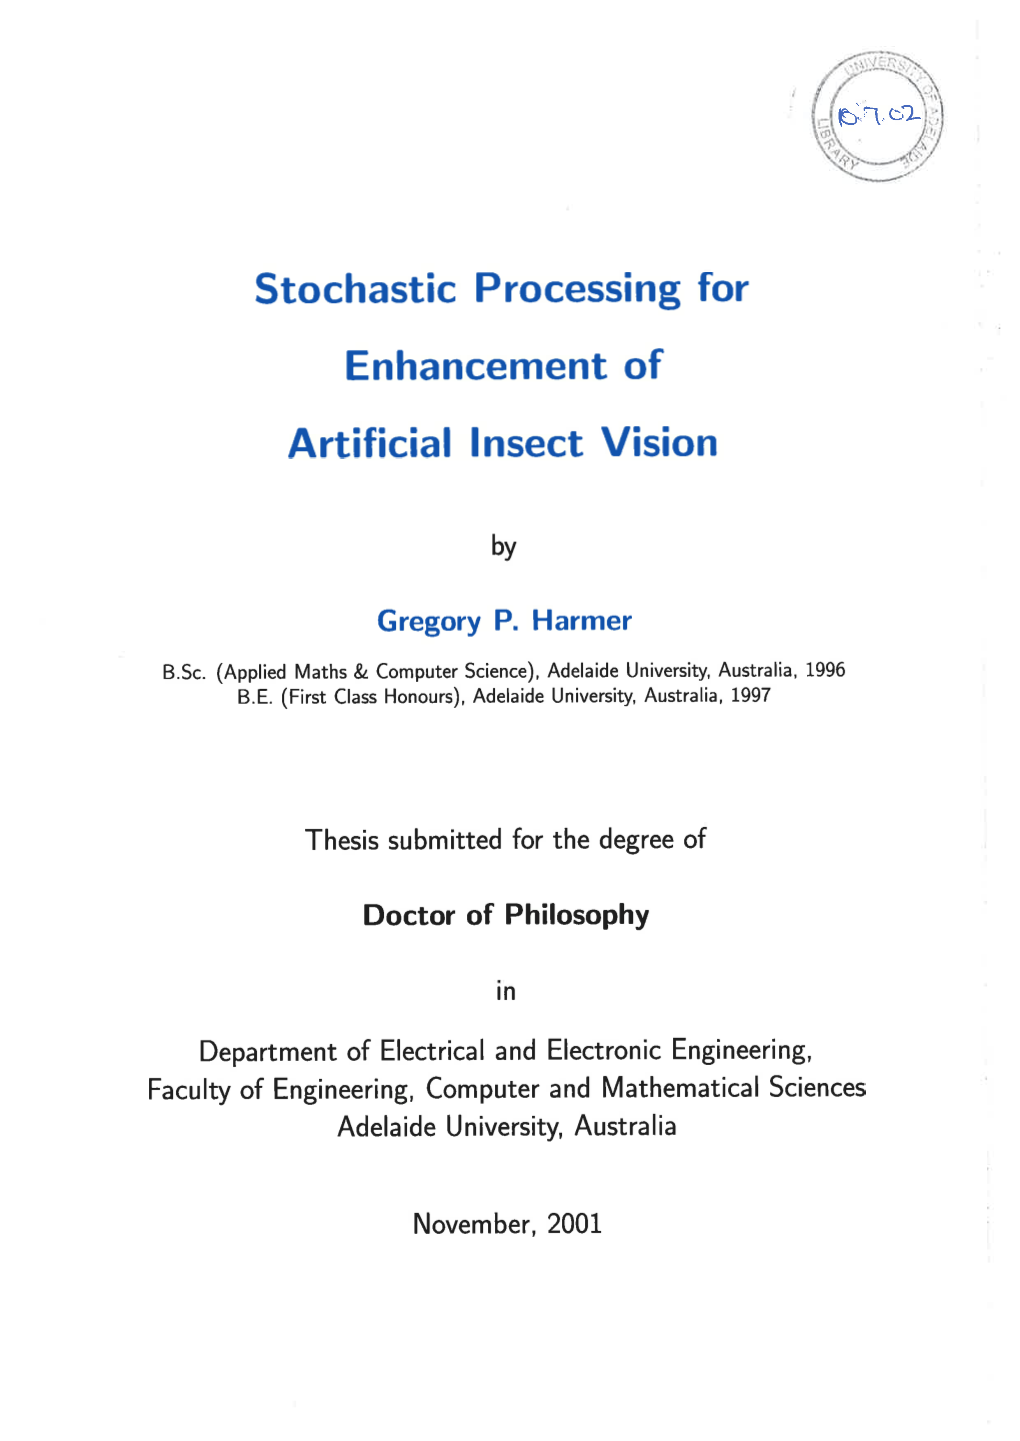 Stochastic Processing for Enhancement of Artificial Insect Vision